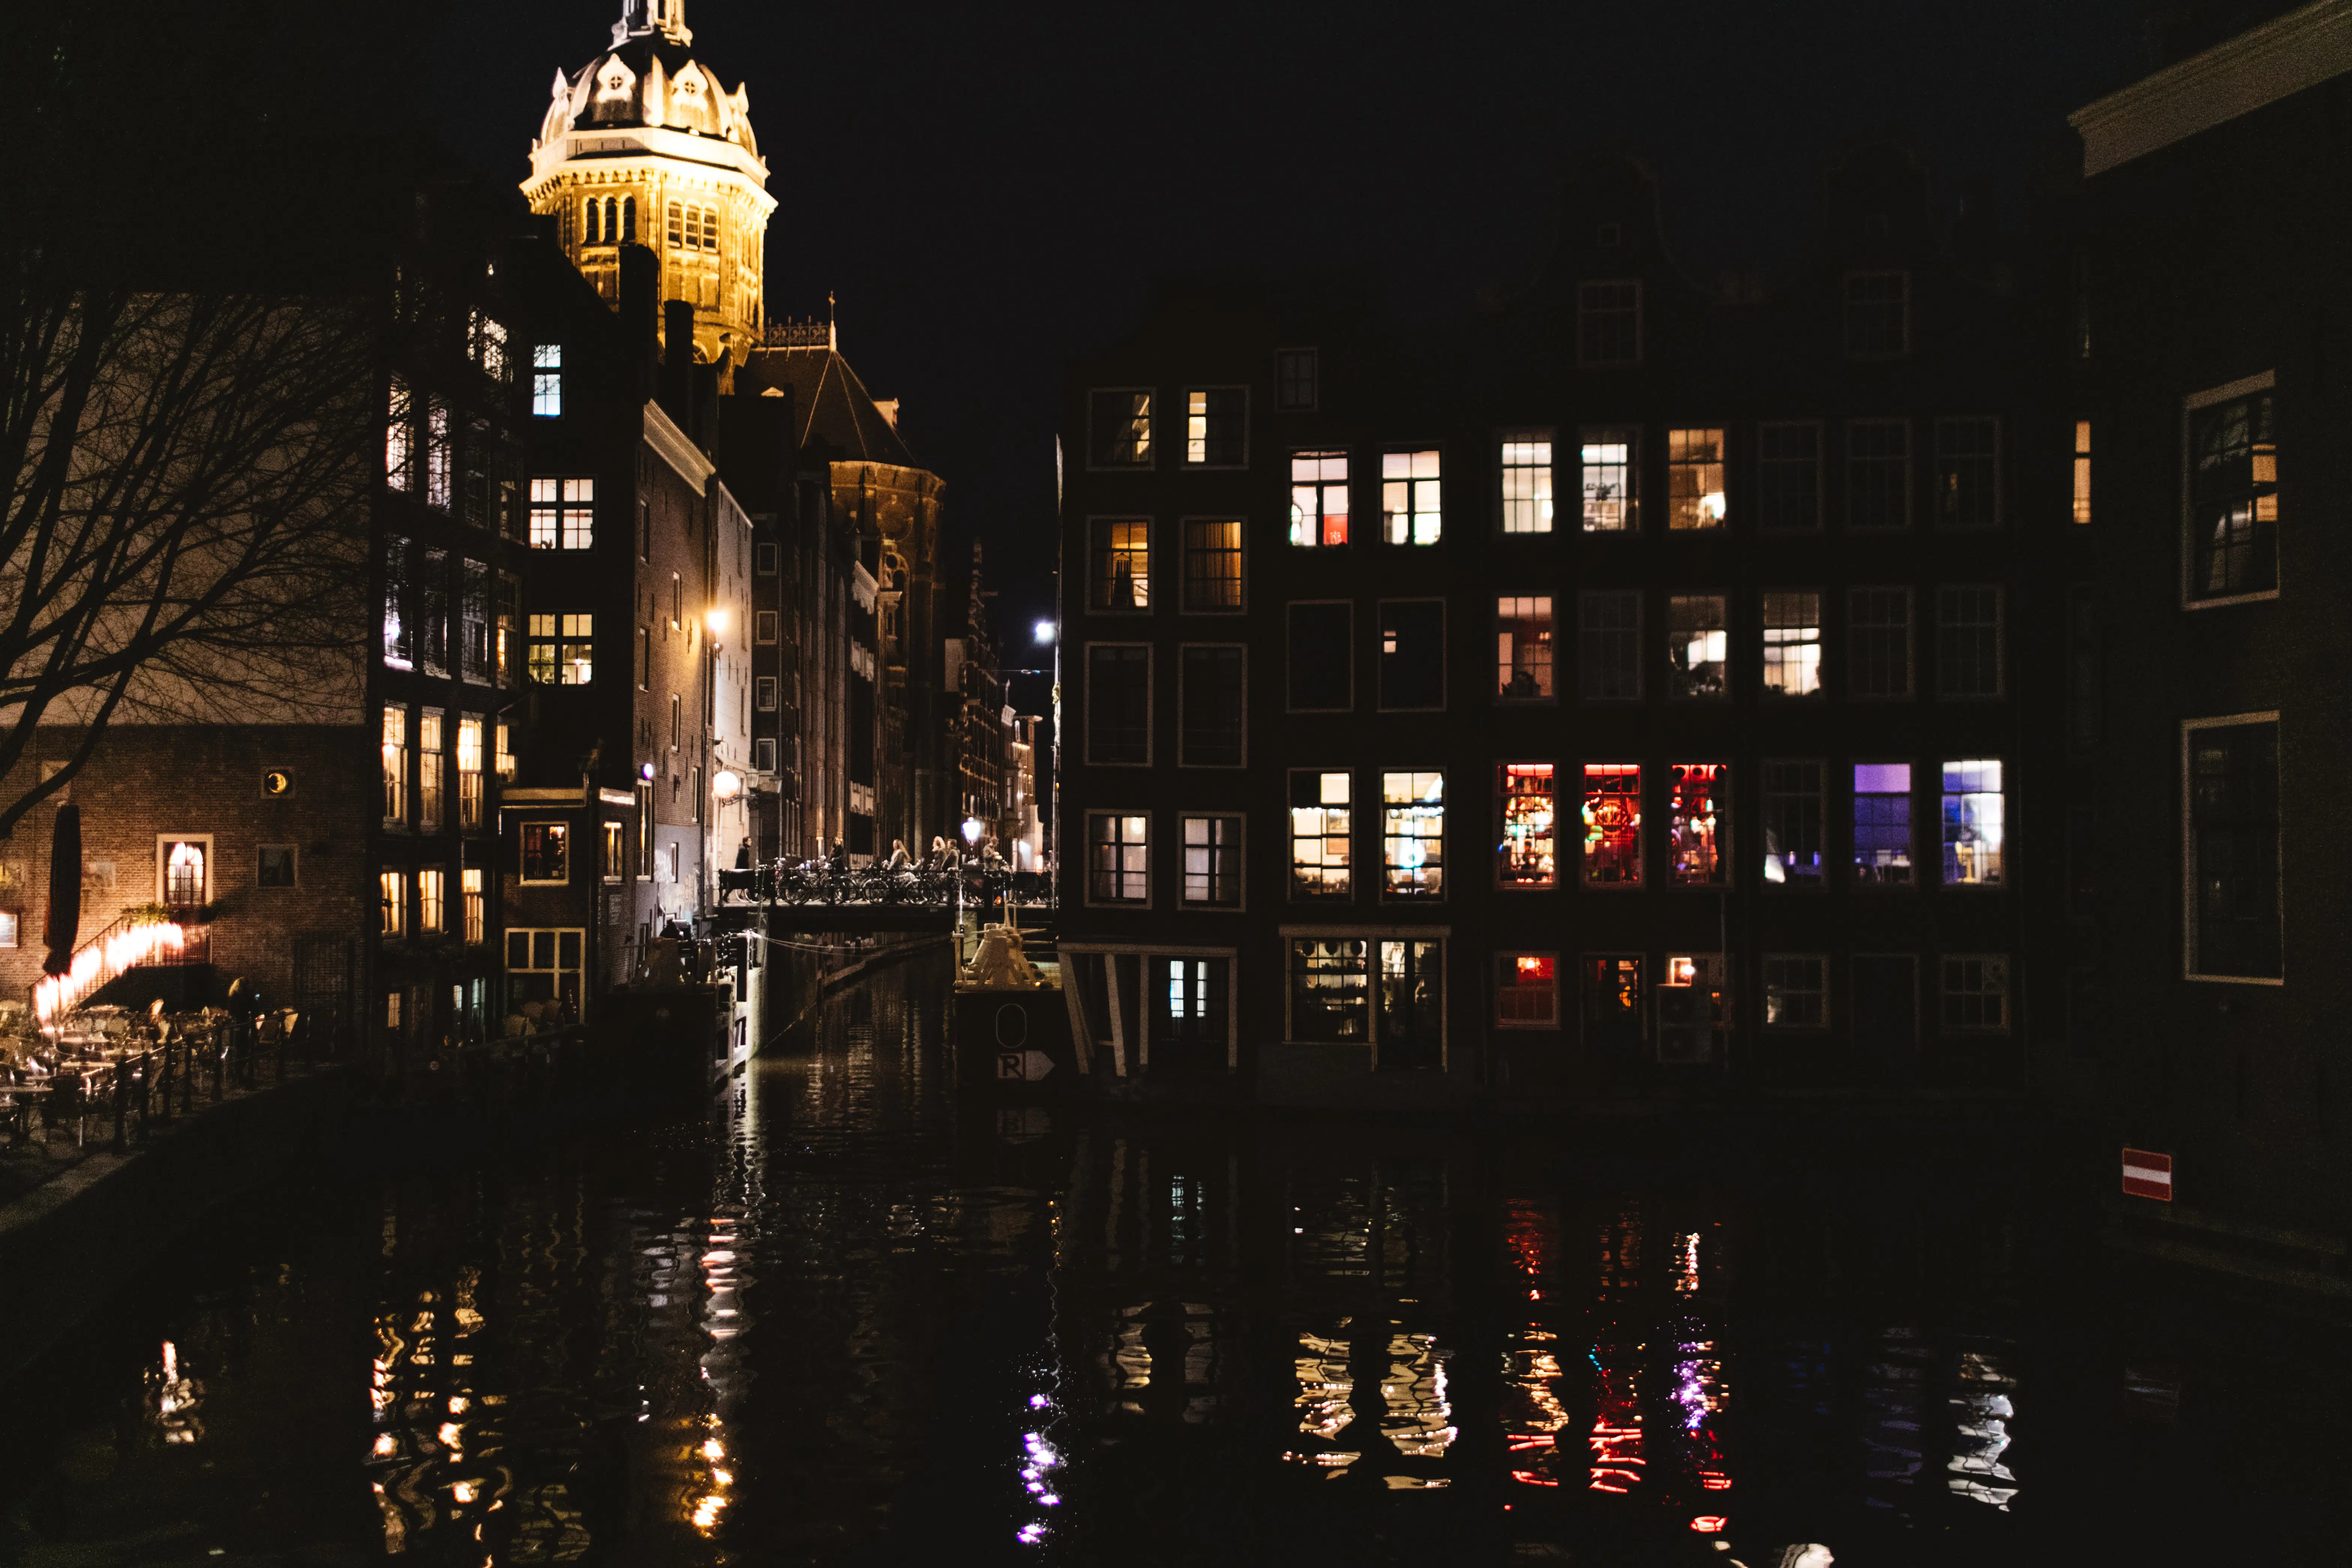 night time lights by one of Amsterdam's many canals